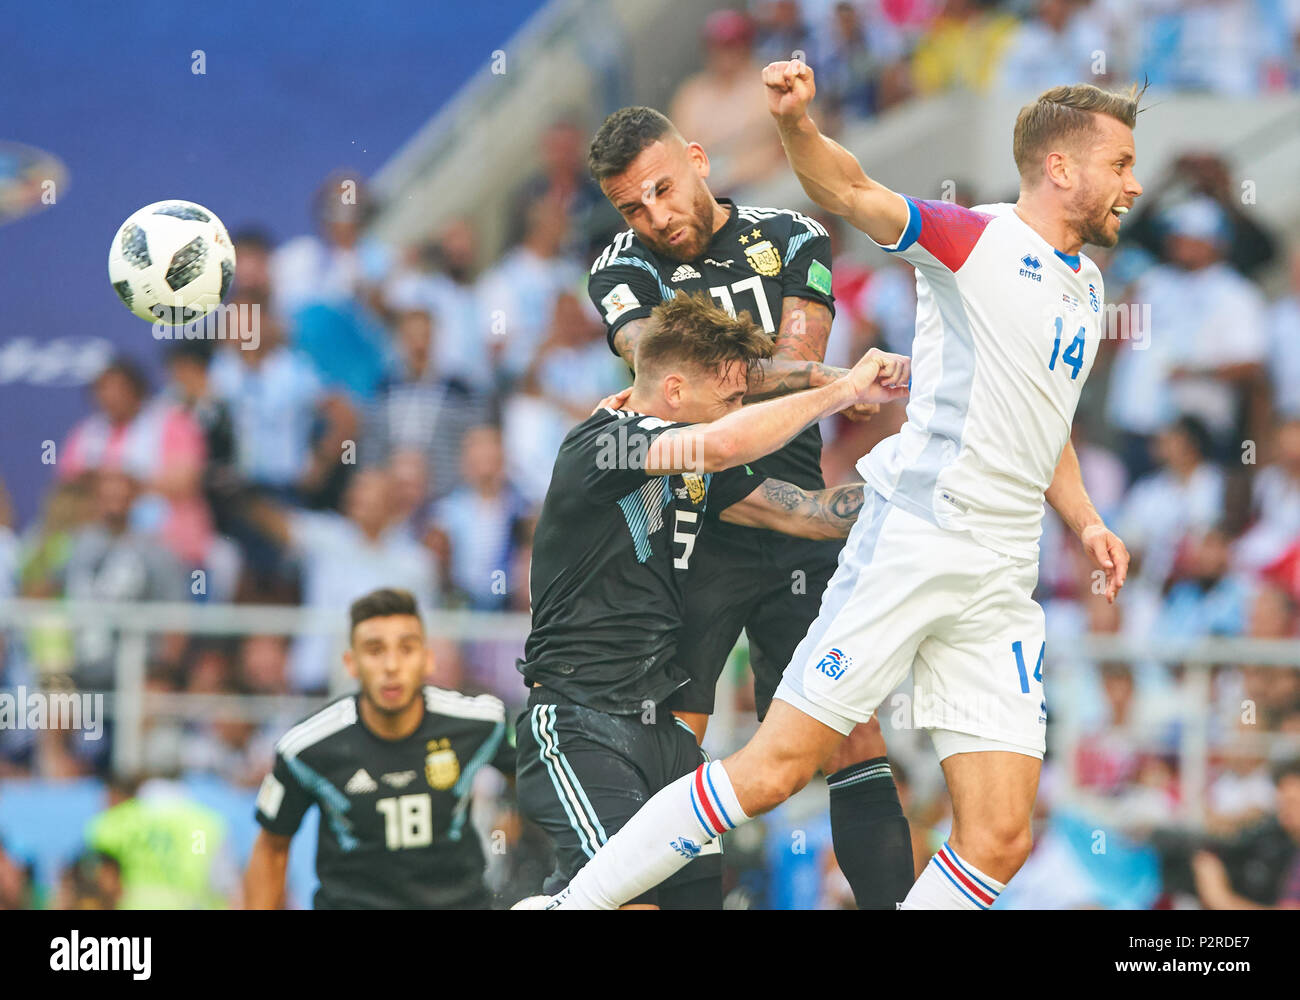 Moscow, Russia. 16th Jun, 2018. Argentina- Iceland, Soccer, Moscow, June 16, 2018 Kari ARNASON, ISL 14  compete for the ball, tackling, duel, header against Nicolas OTAMENDI, Argentina 17 Lucas BIGLIA, Argentina 5   ARGENTINA - ICELAND 1-1 FIFA WORLD CUP 2018 RUSSIA, Season 2018/2019,  June 16, 2018 S p a r t a k Stadium in Moscow, Russia.  © Peter Schatz / Alamy Live News Stock Photo